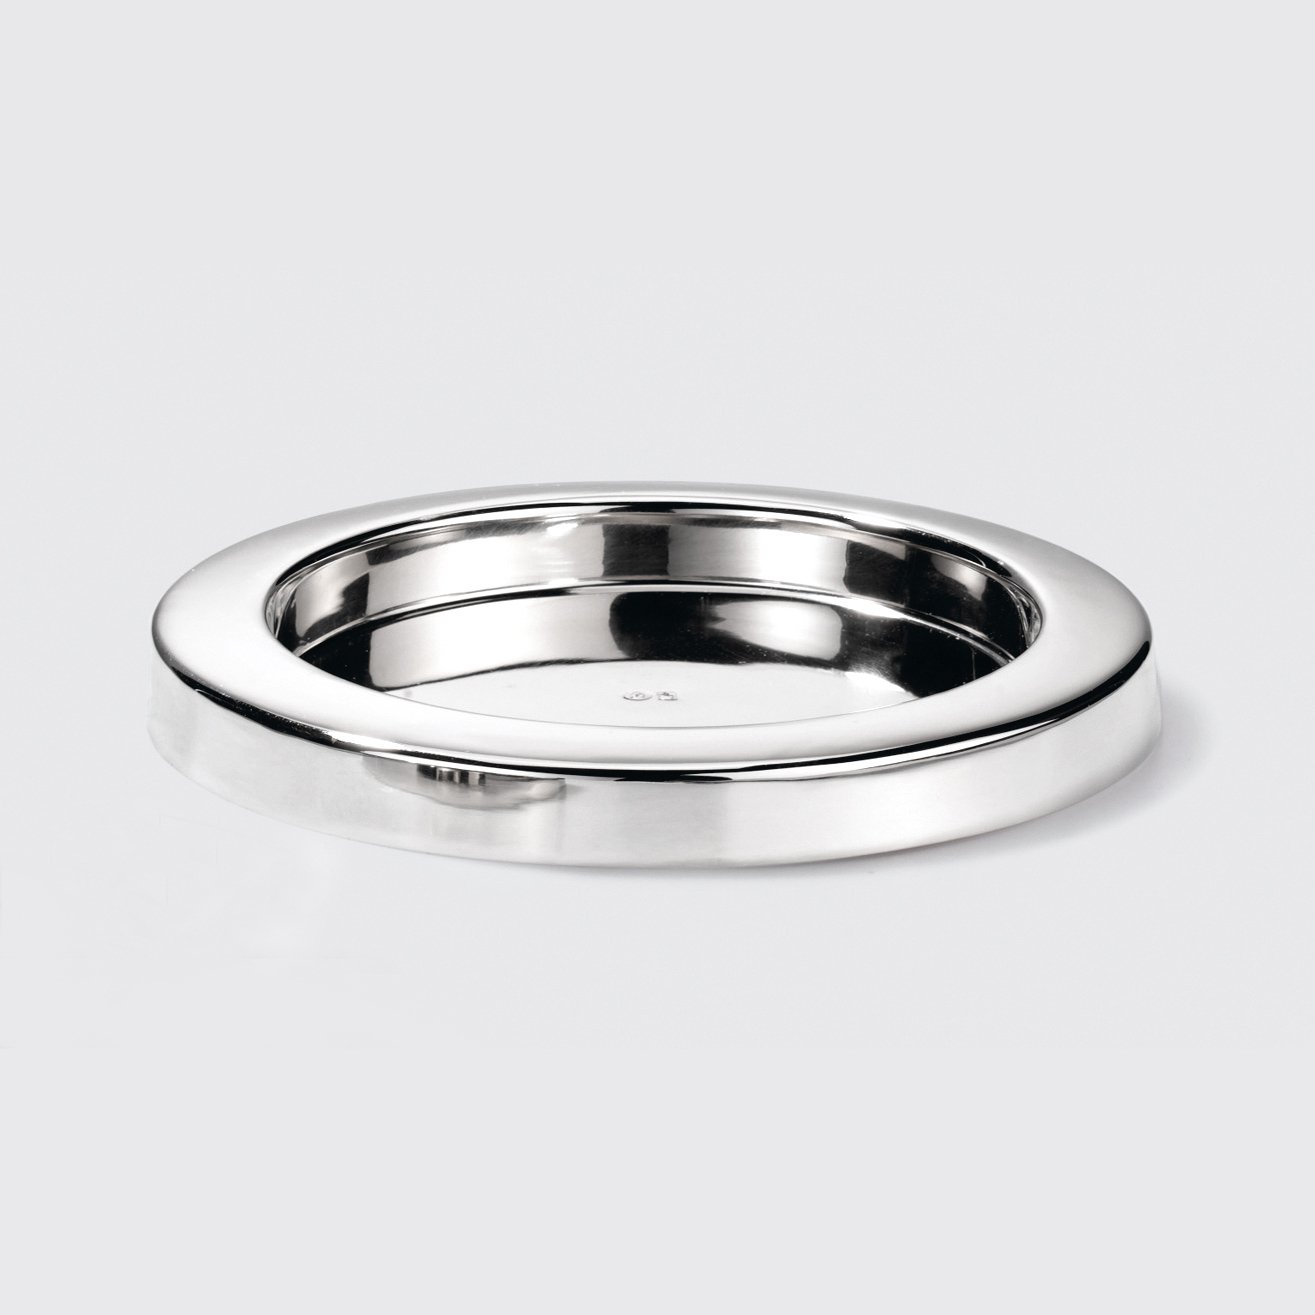 Sina candle holder nickel plated D16 inside D12,3c